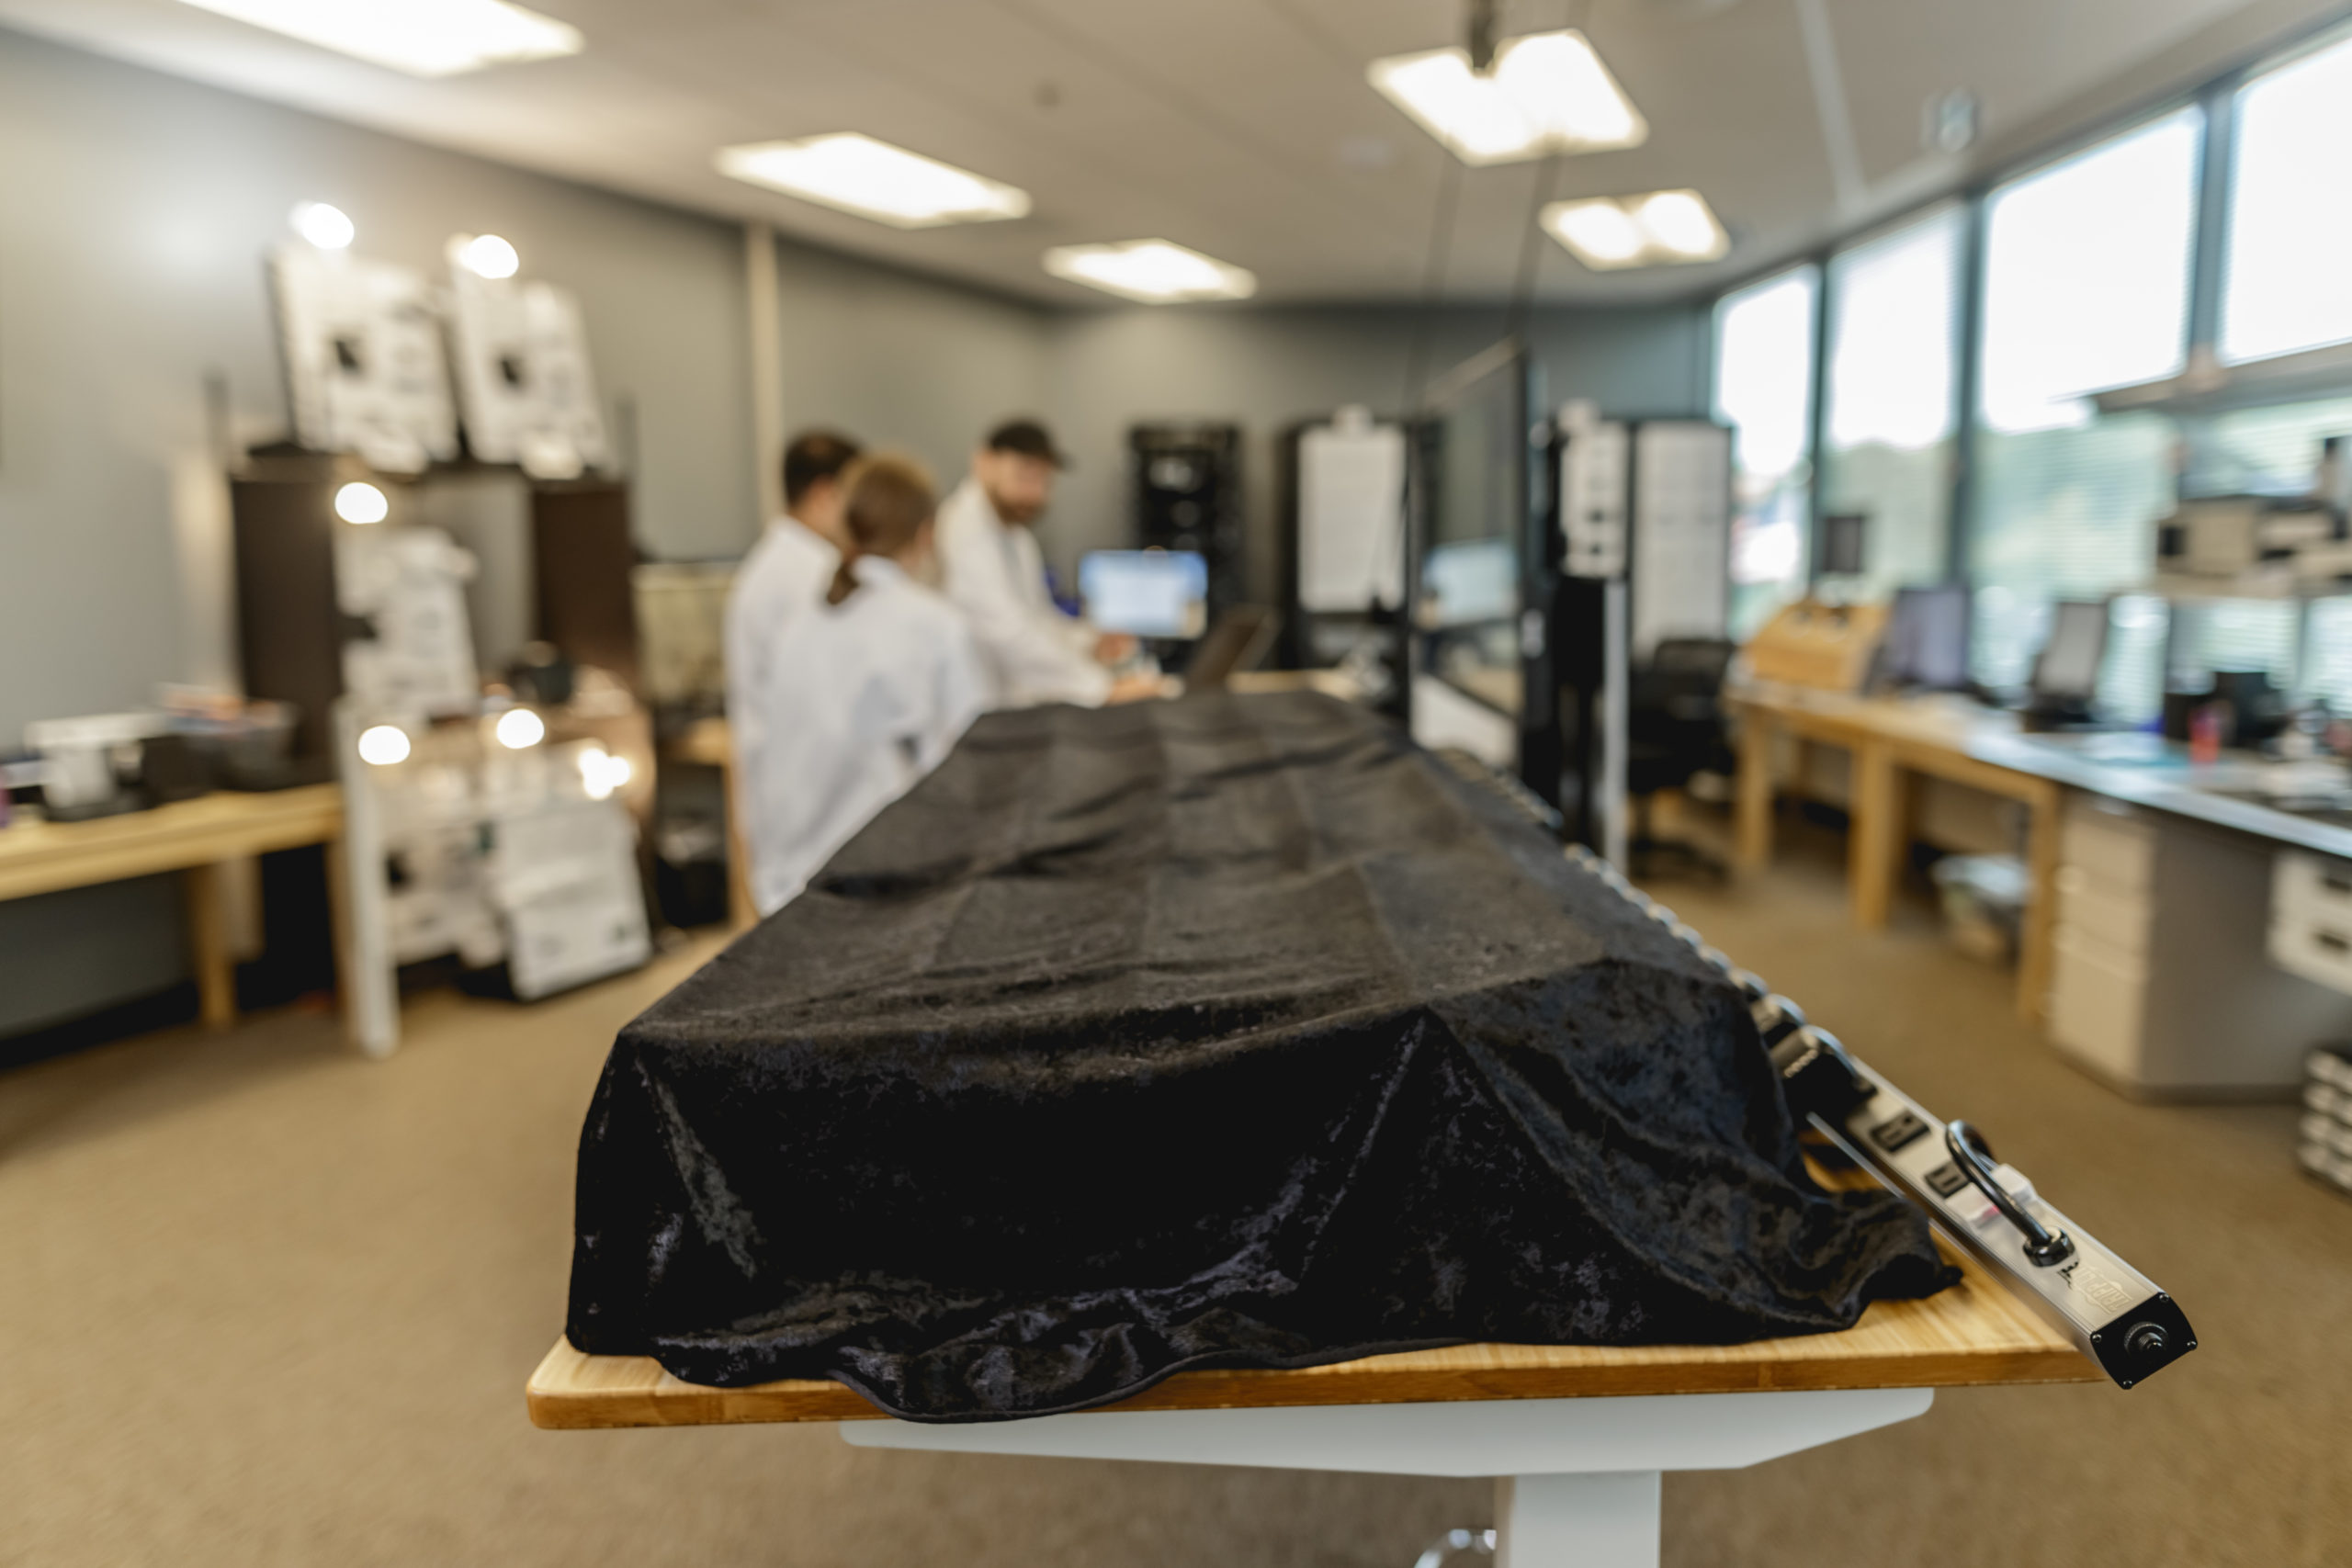 A cloaked set of pre launch testing devices in K4Labs